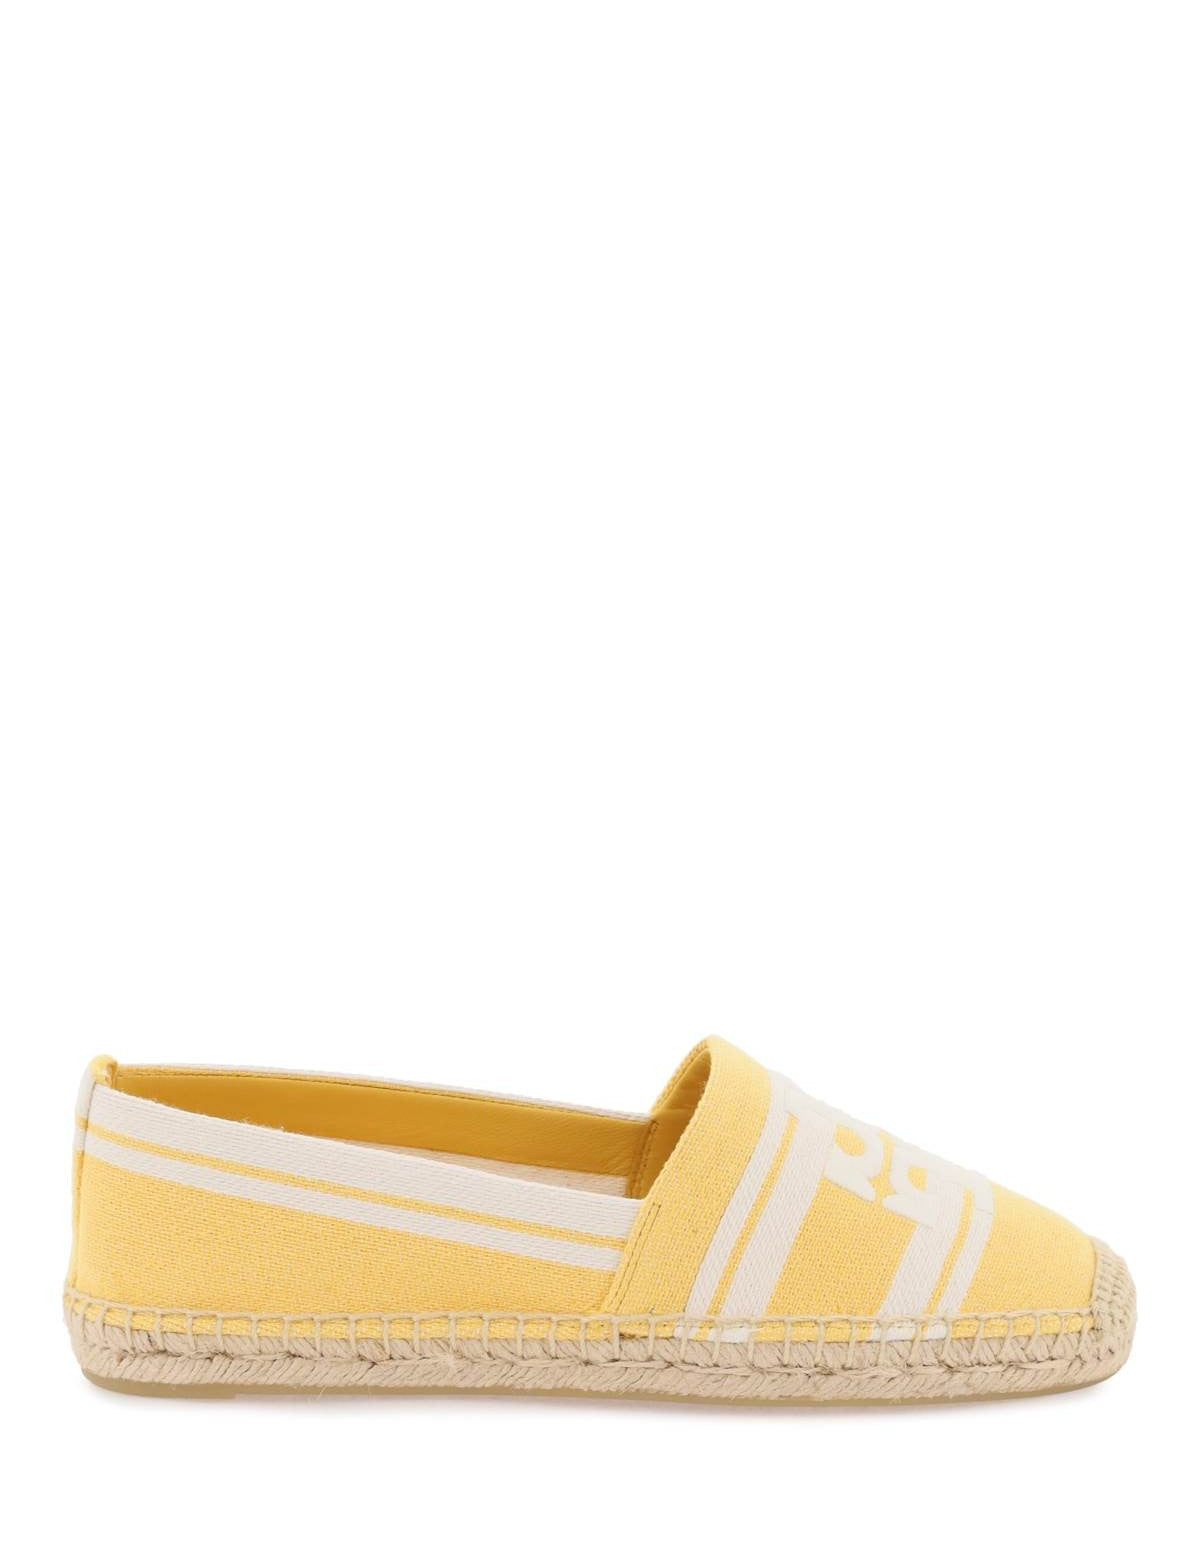 tory-burch-striped-espadrilles-with-double-t.jpg